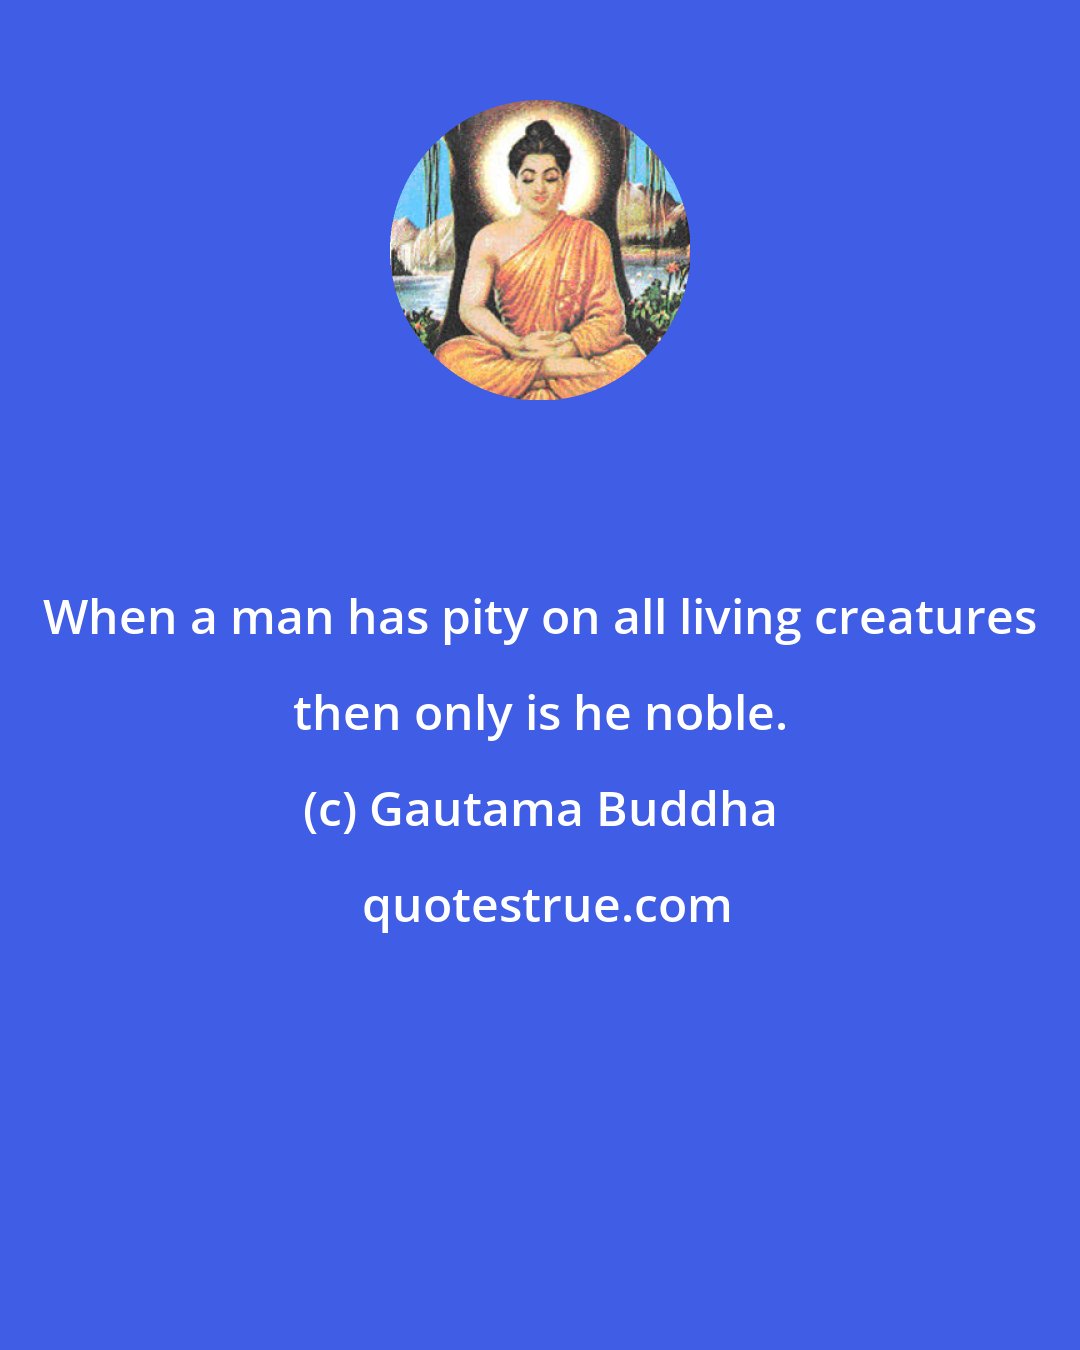 Gautama Buddha: When a man has pity on all living creatures then only is he noble.